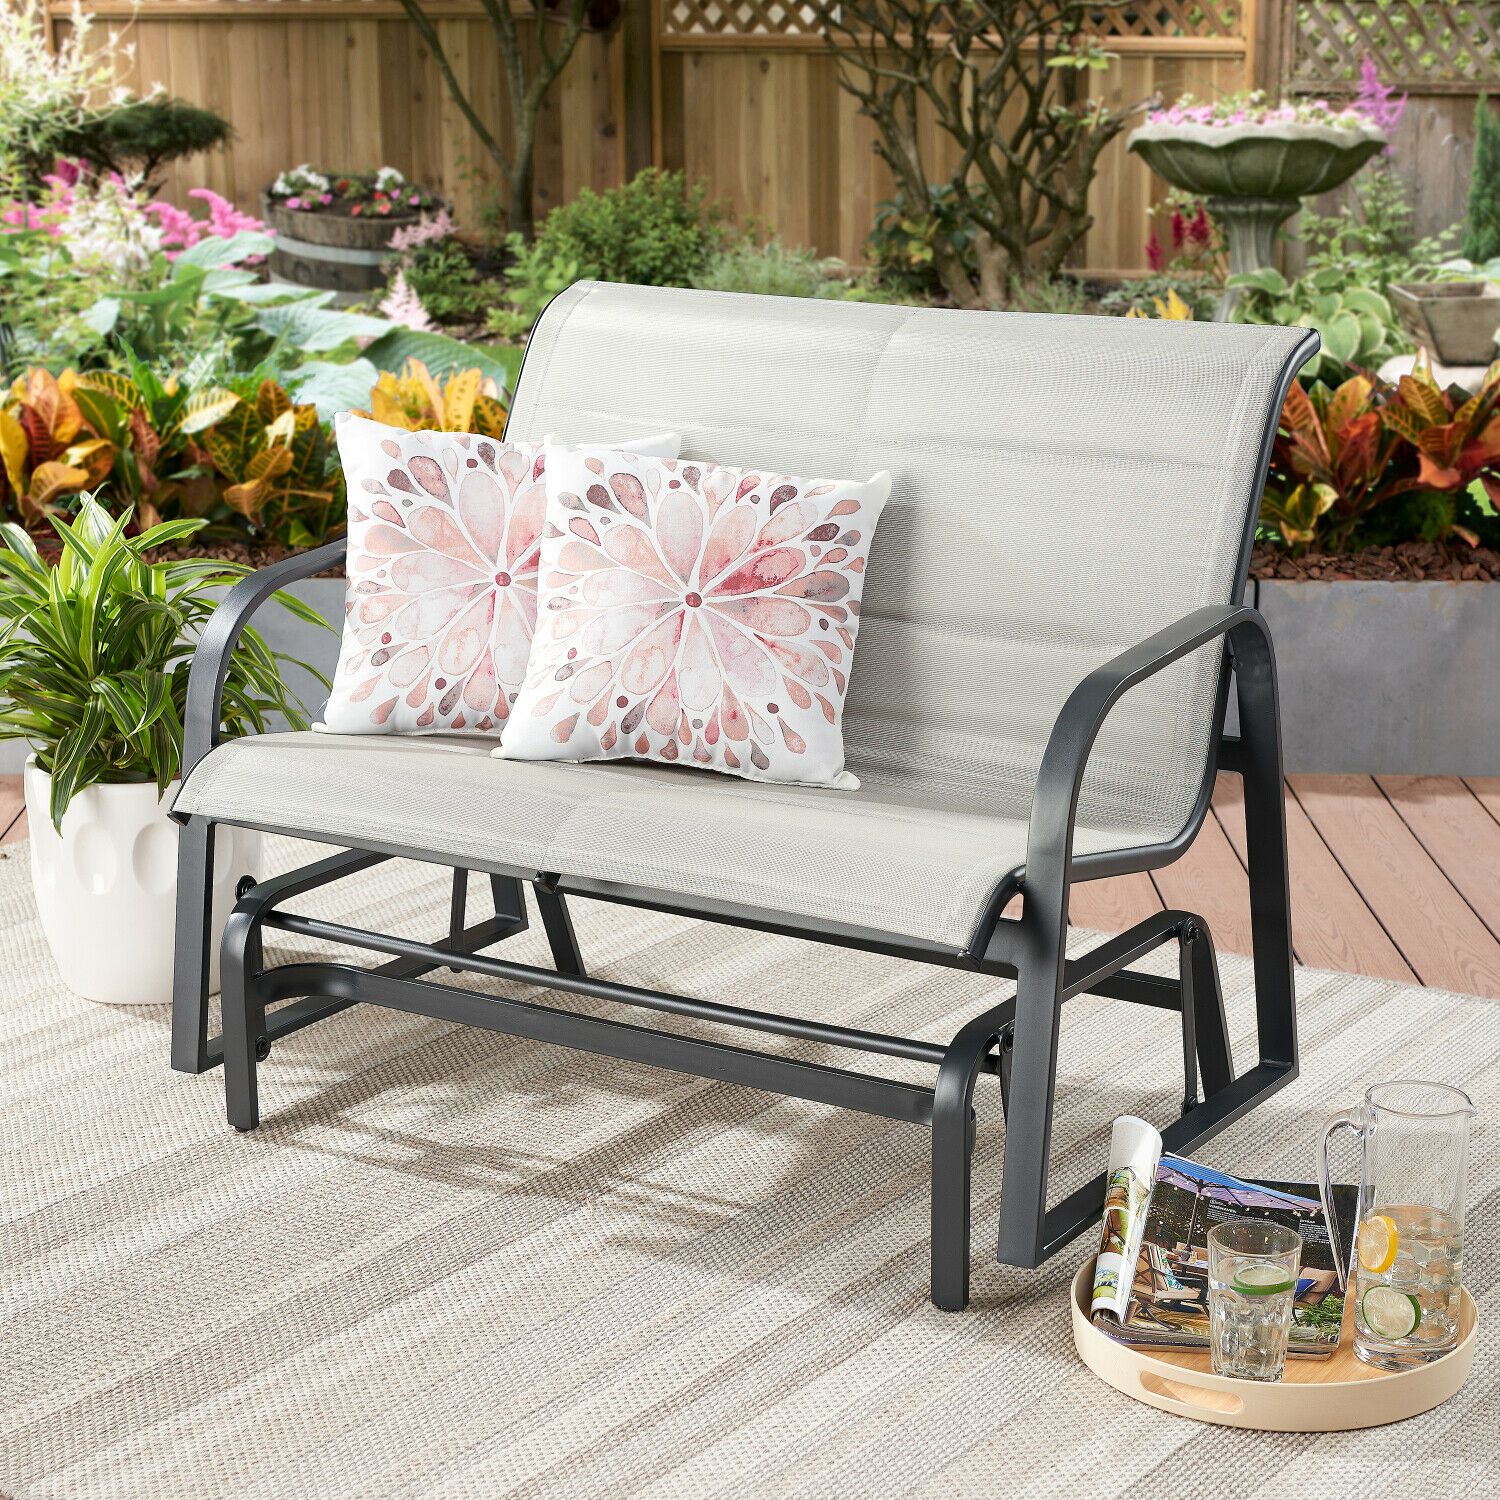 Montrose Padded Sling Glider Bench Outdoor Garden Patio Porch Furniture  Chair Pertaining To Padded Sling Double Gliders (View 18 of 25)